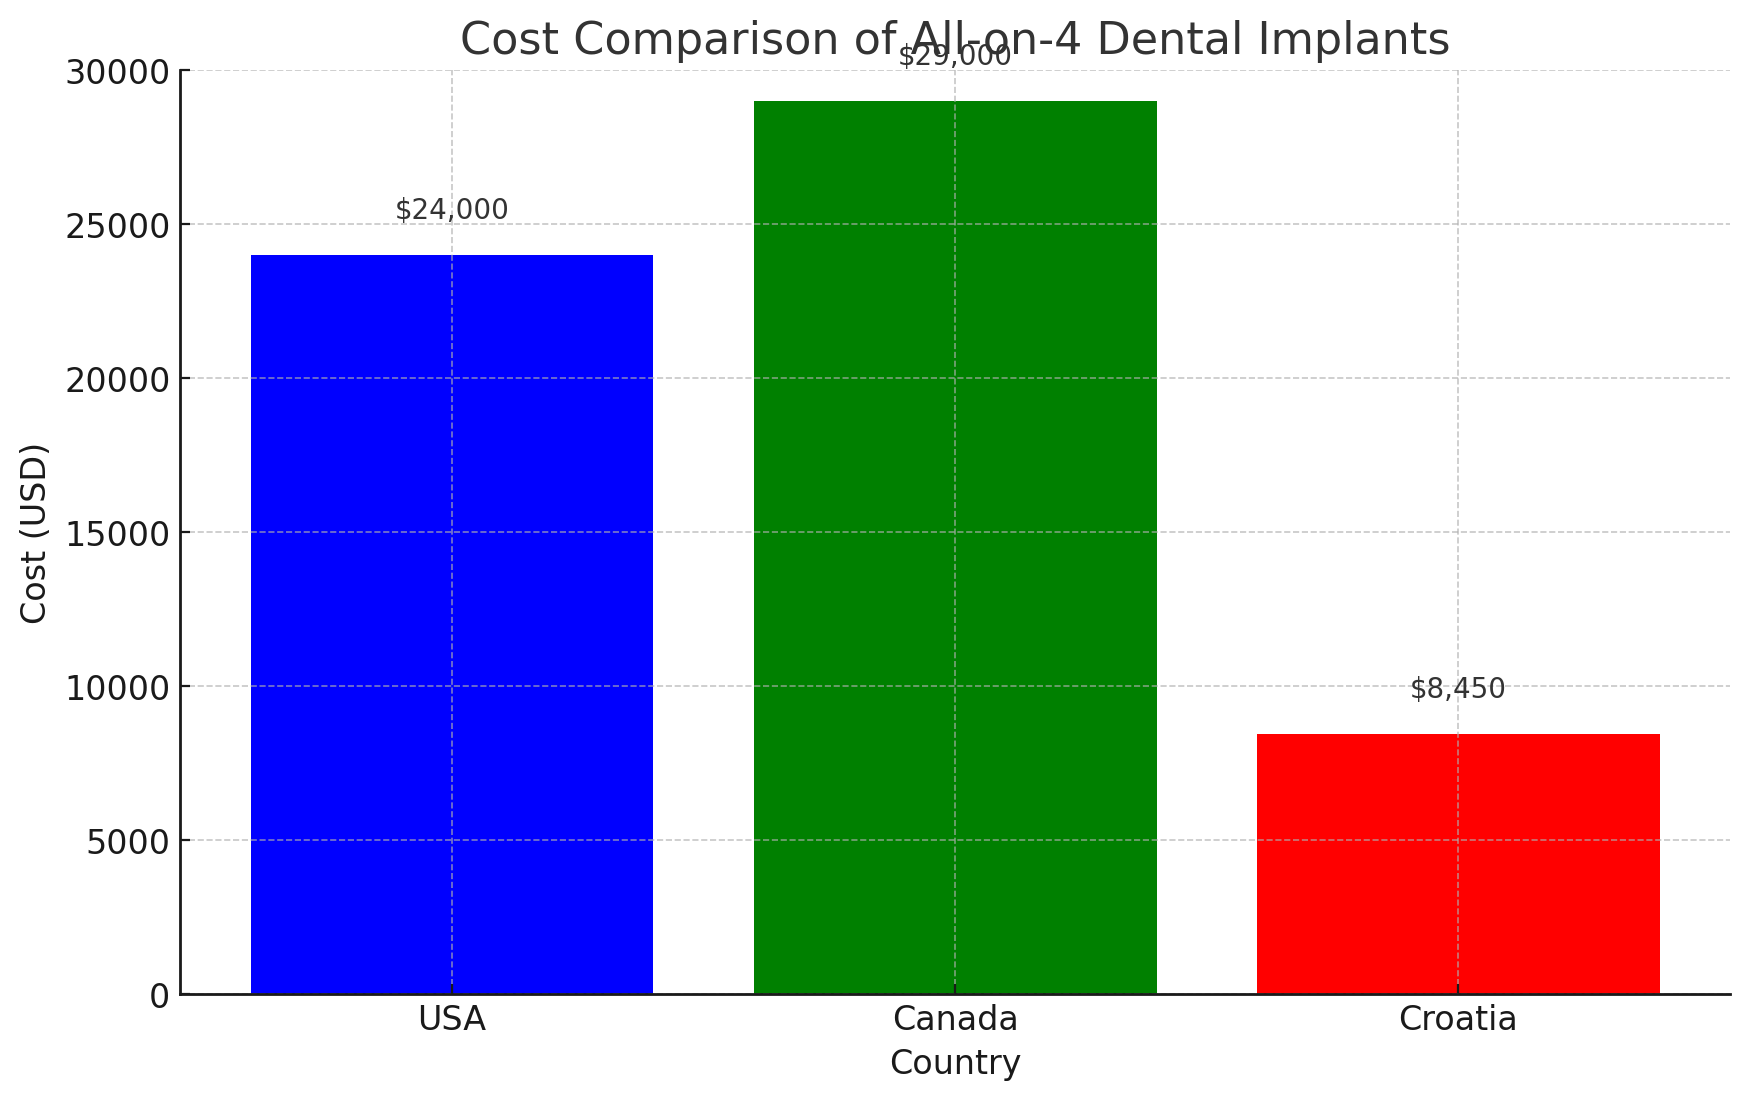 costs of All-on-4 dental implants in Croatia, the USA, and Canada